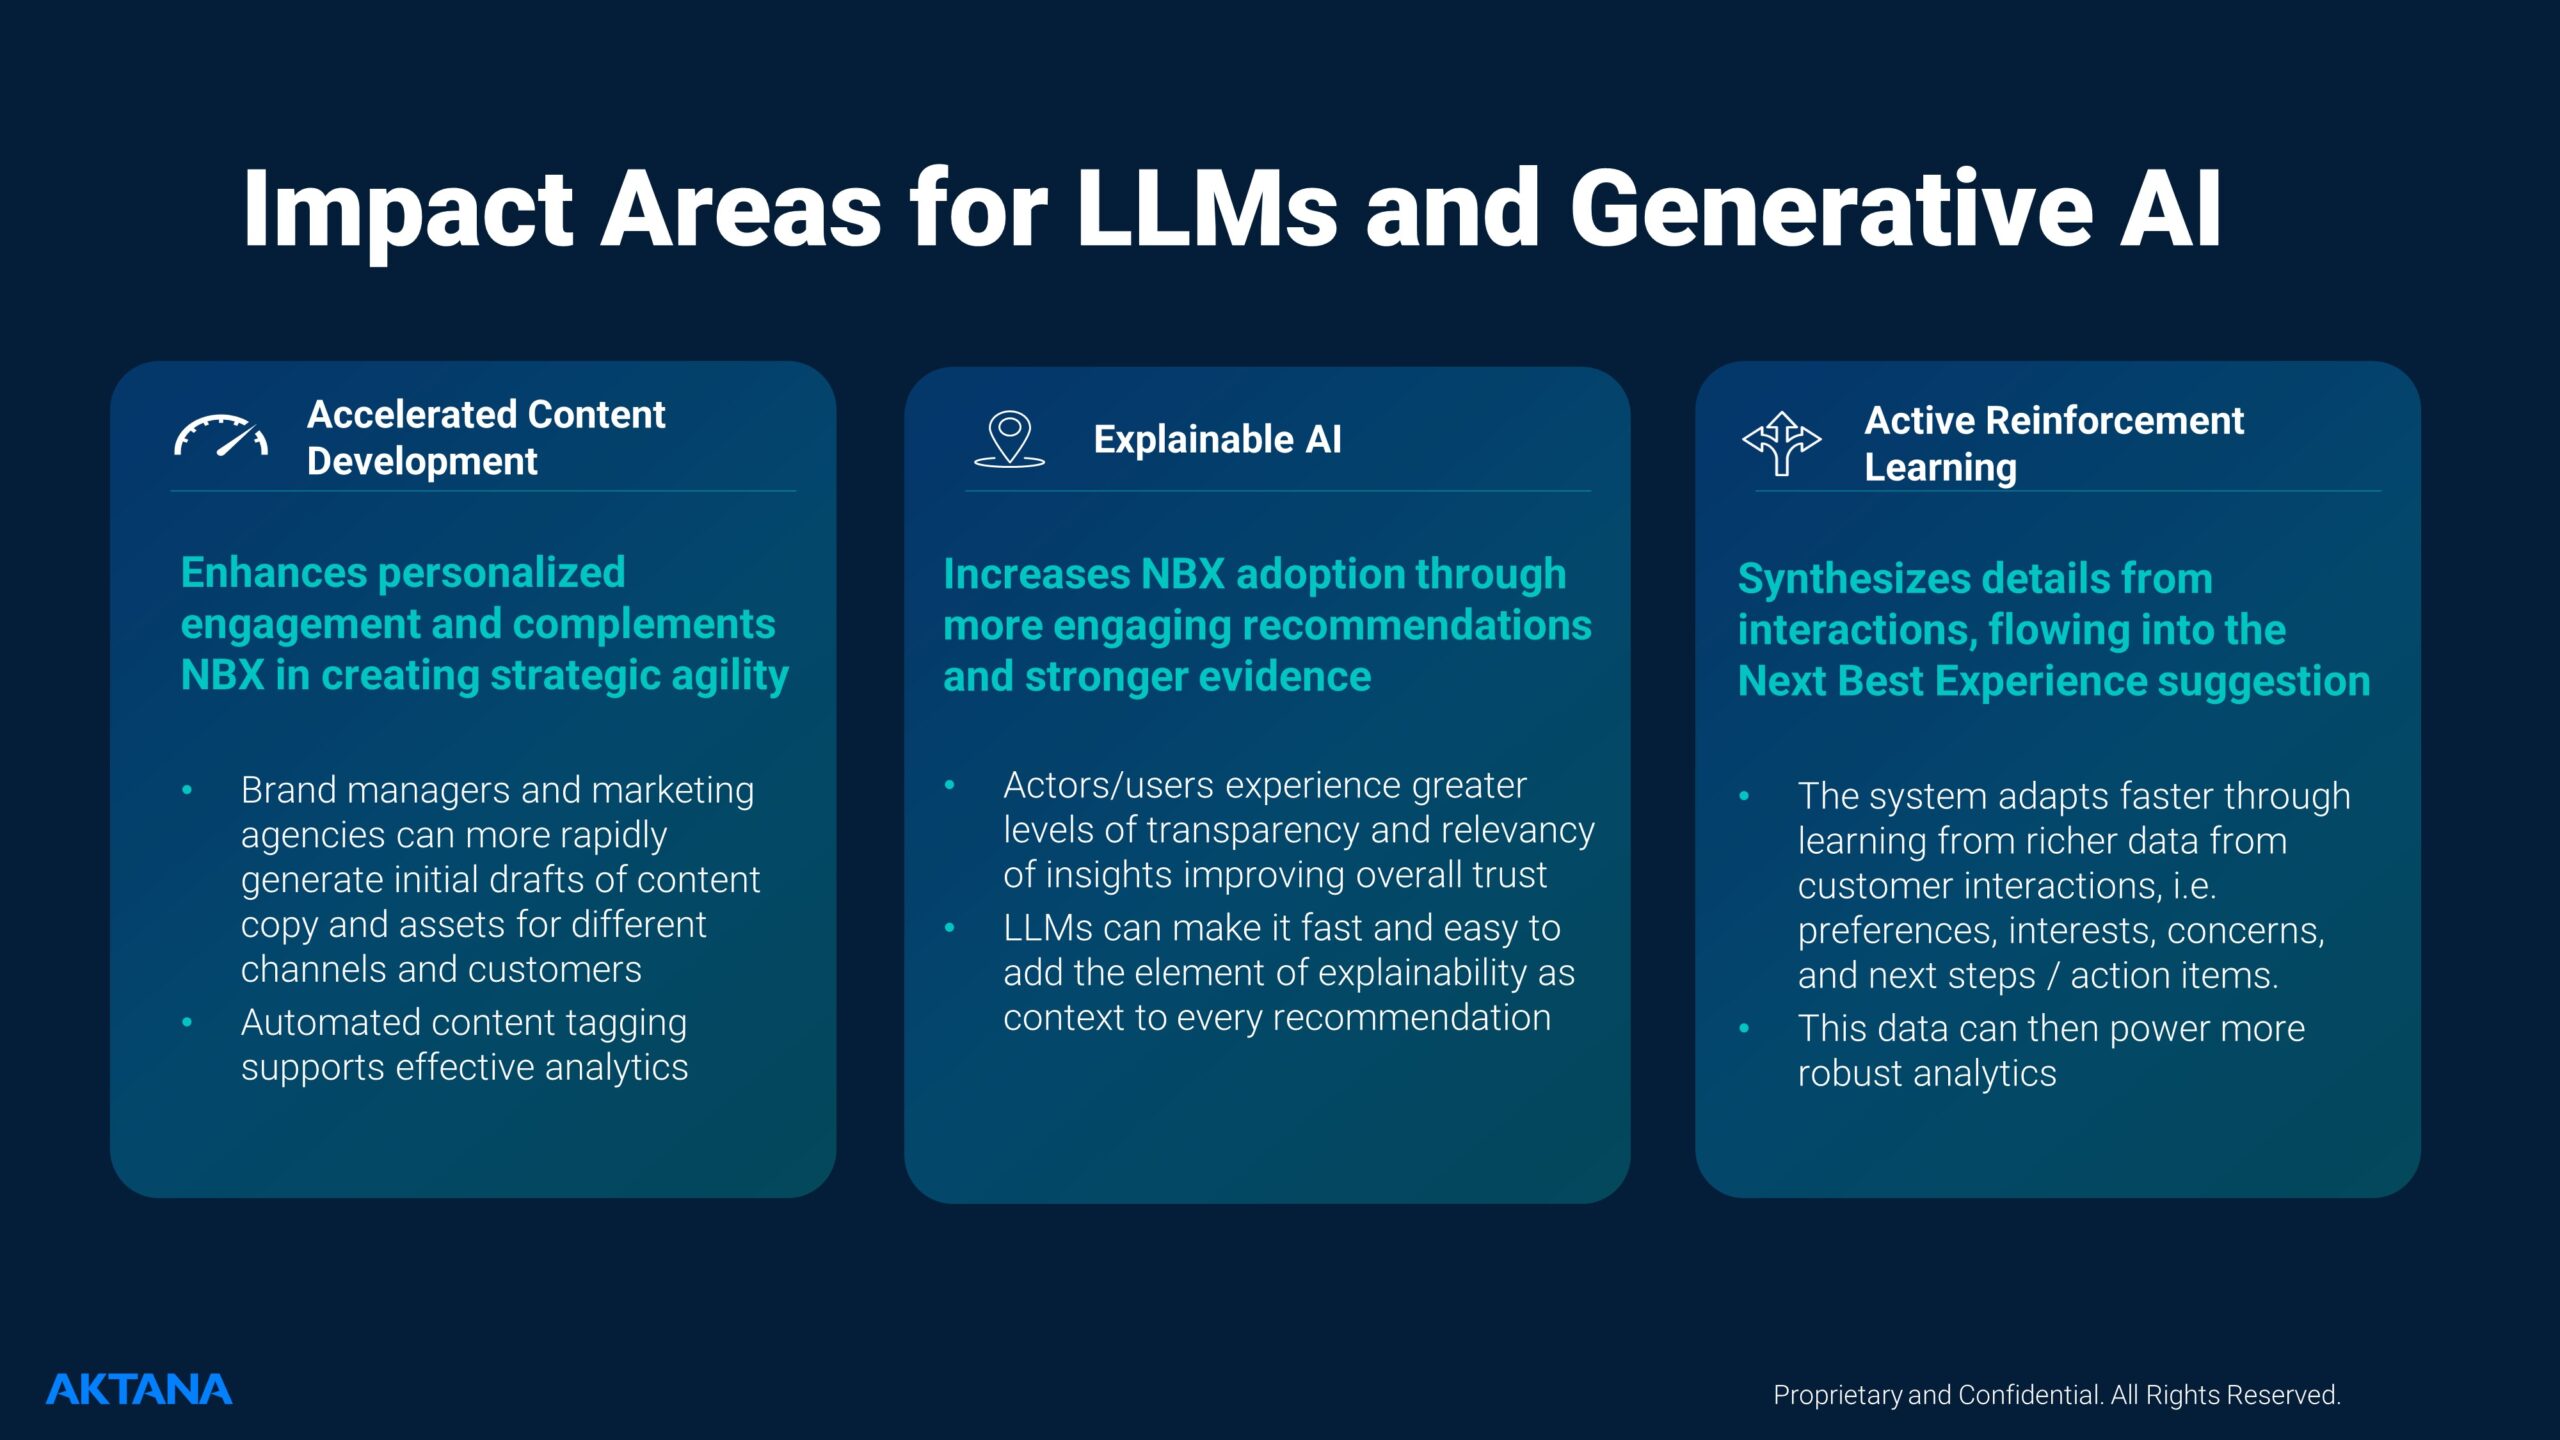 Impact Areas for LLMs and Generative AI 1. Accelerated Content Development: Enhances personalized engagement and complements NBX in creating strategic agility Brand managers and marketing agencies can more rapidly generate initial drafts of content copy and assets for different channels and customers Automated content tagging supports effective analytics 2. Explainable AI: Increases NBX adoption through more engaging recommendations and stronger evidence Actors/users experience greater levels of transparency and relevancy of insights improving overall trust LLMs can make it fast and easy to add the element of explainability as context to every recommendation 3. Active Reinforcement Learning: Synthesizes details from interactions, flowing into the Next Best Experience suggestion The system adapts faster through learning from richer data from customer interactions, i.e. preferences, interests, concerns, and next steps / action items. This data can then power more robust analytics